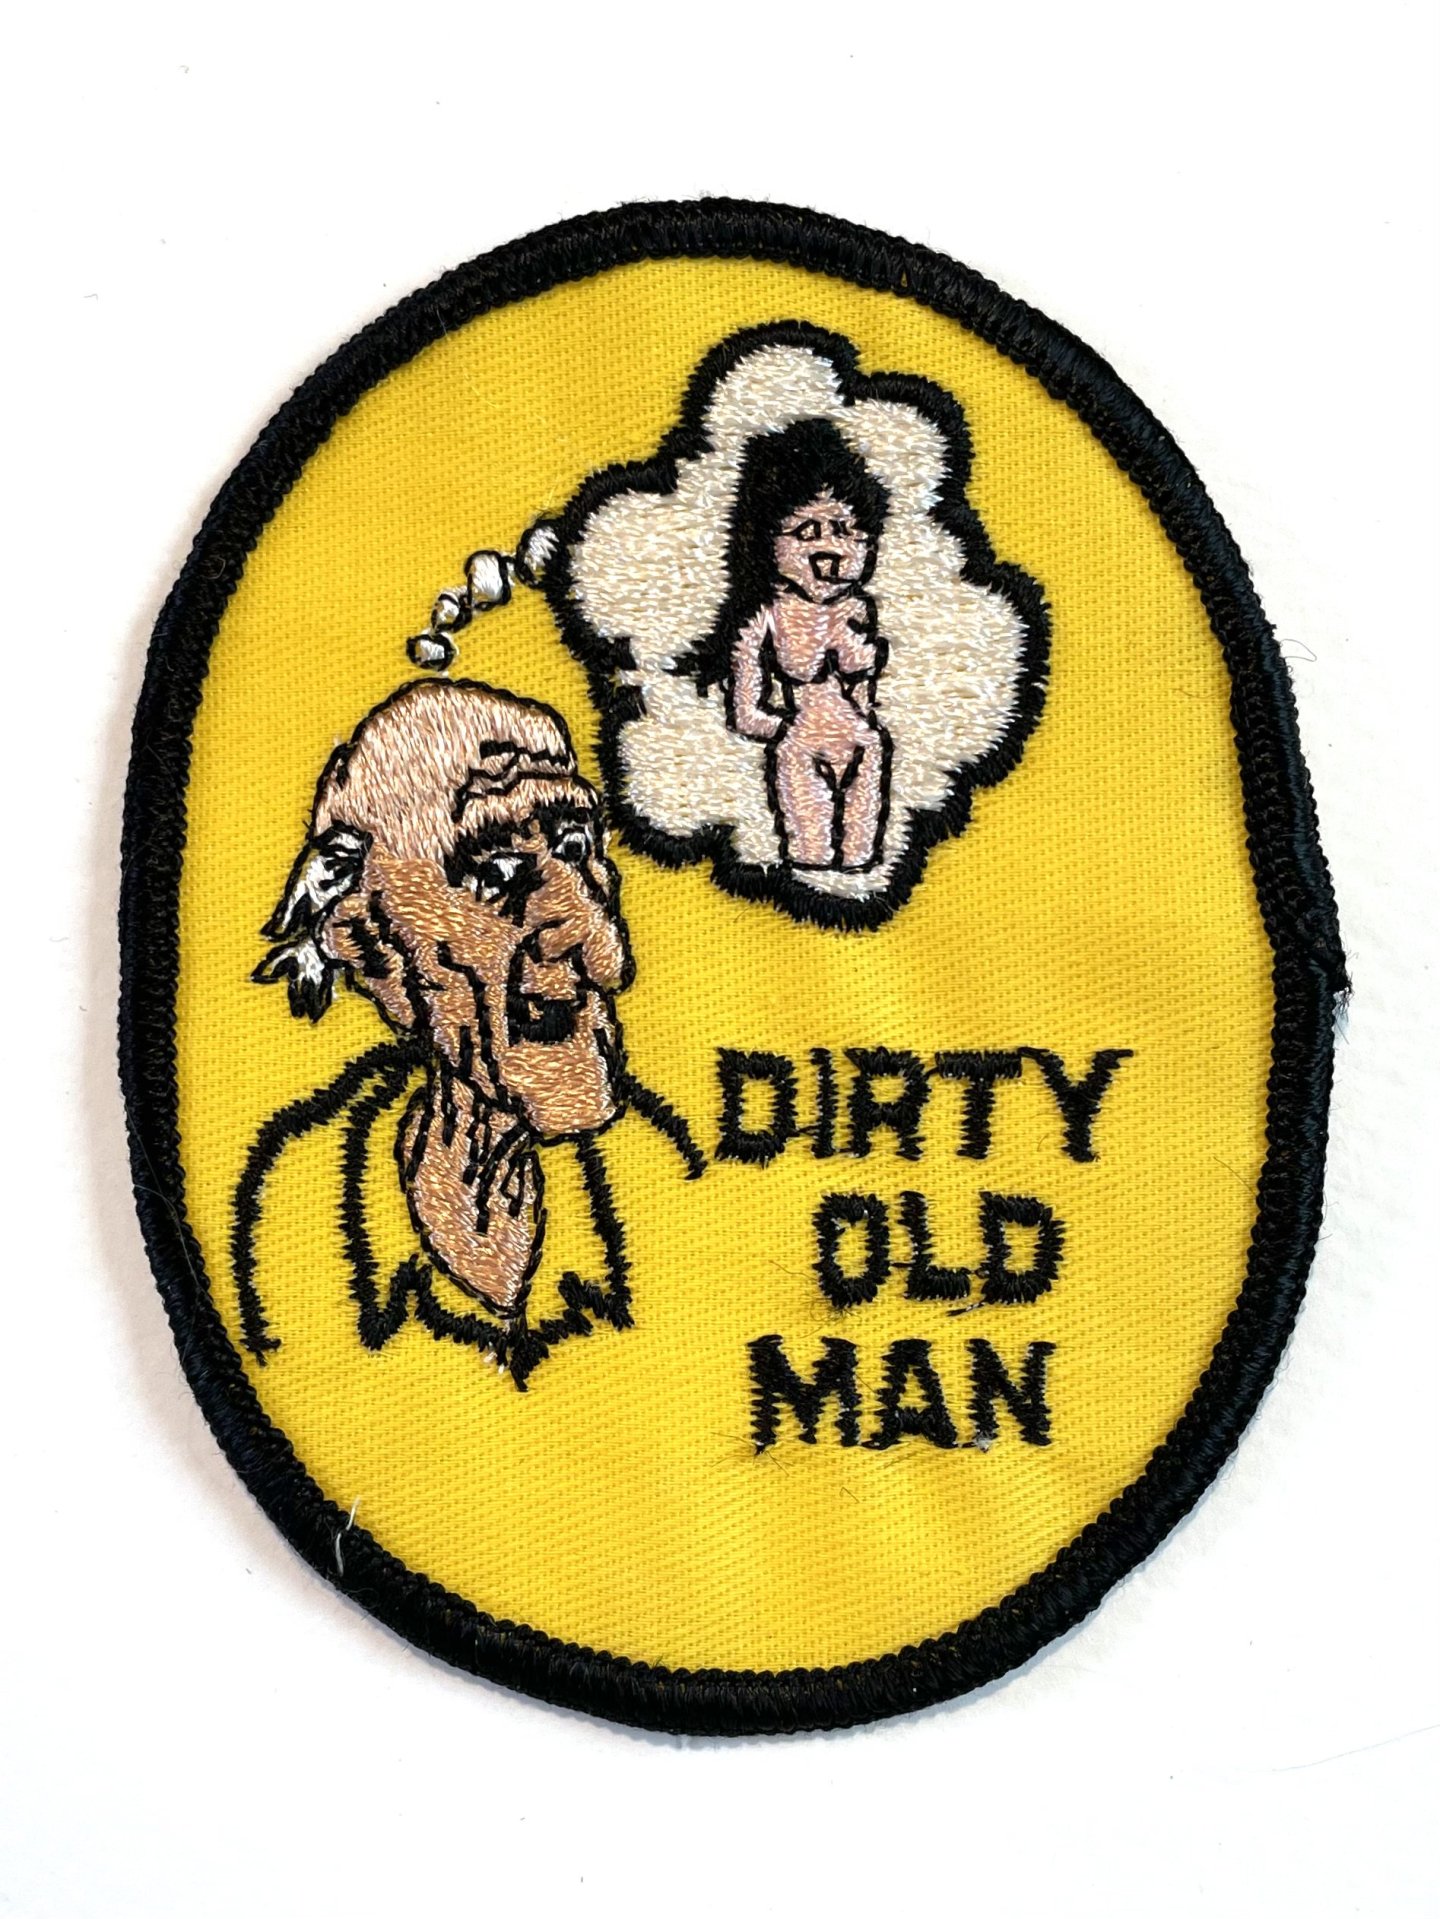 1970's DIRTY OLD MAN